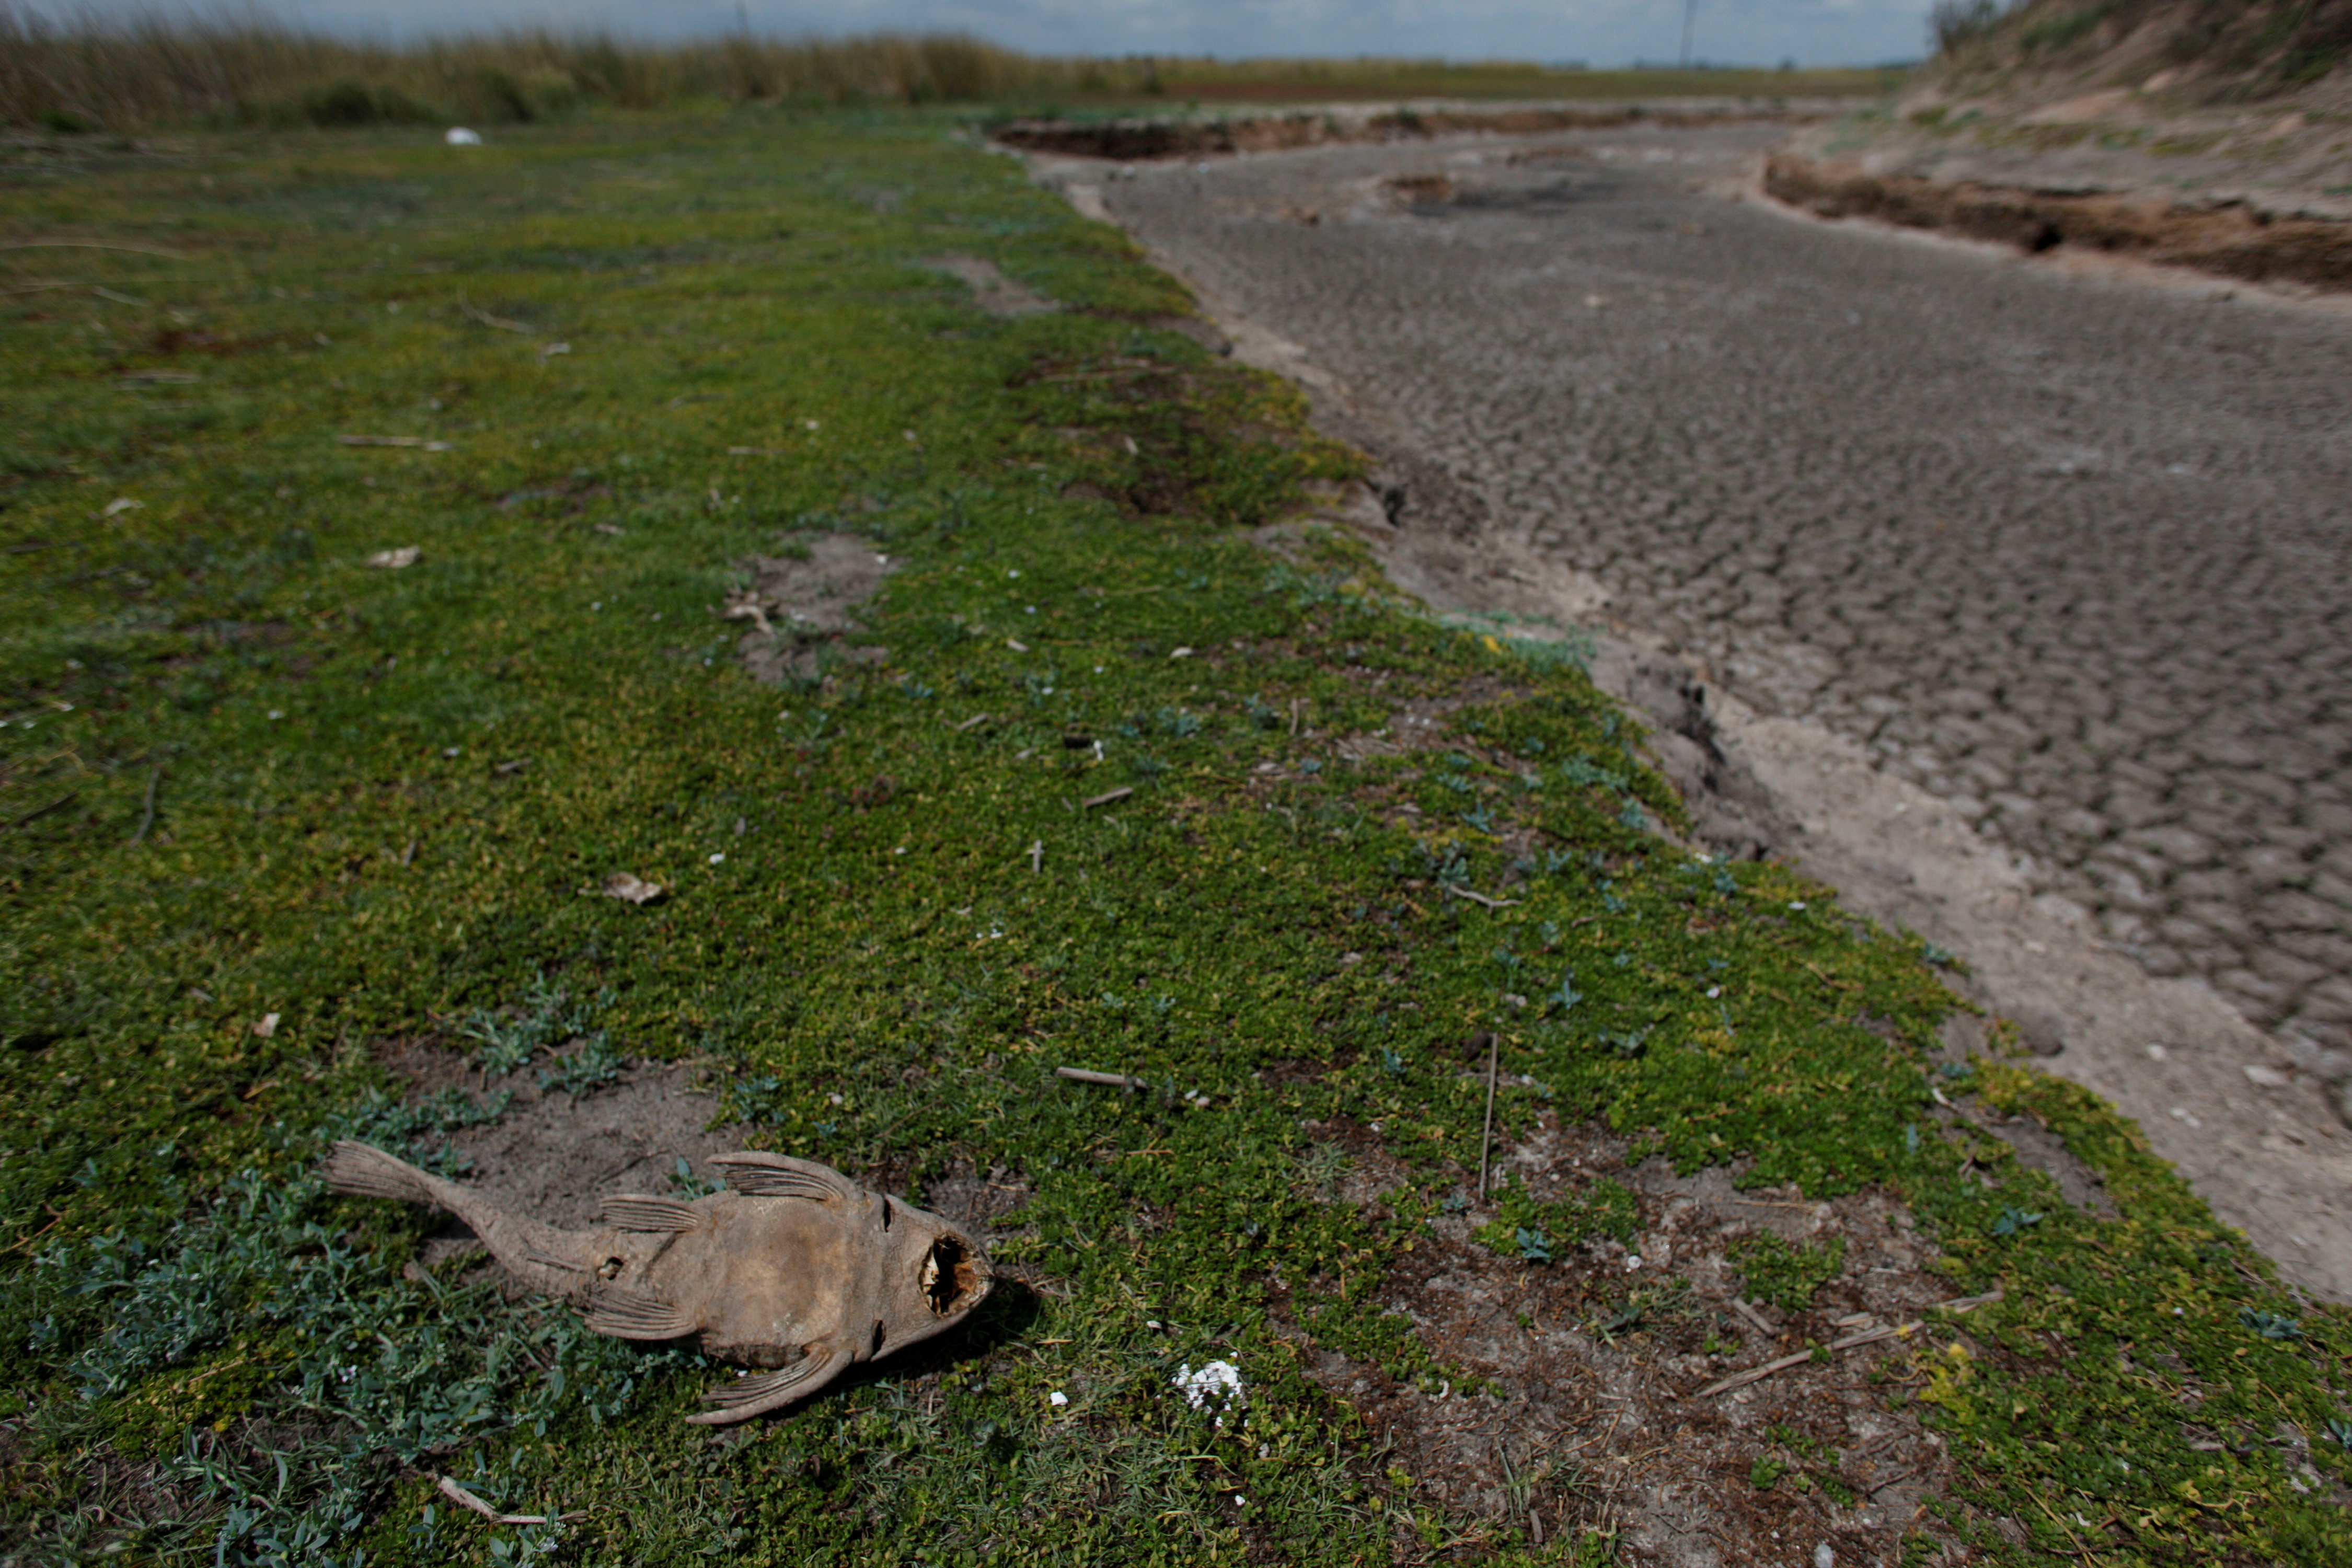 Dead fish is seen at dried-up creek bed in a drought-affected area near Chivilcoy